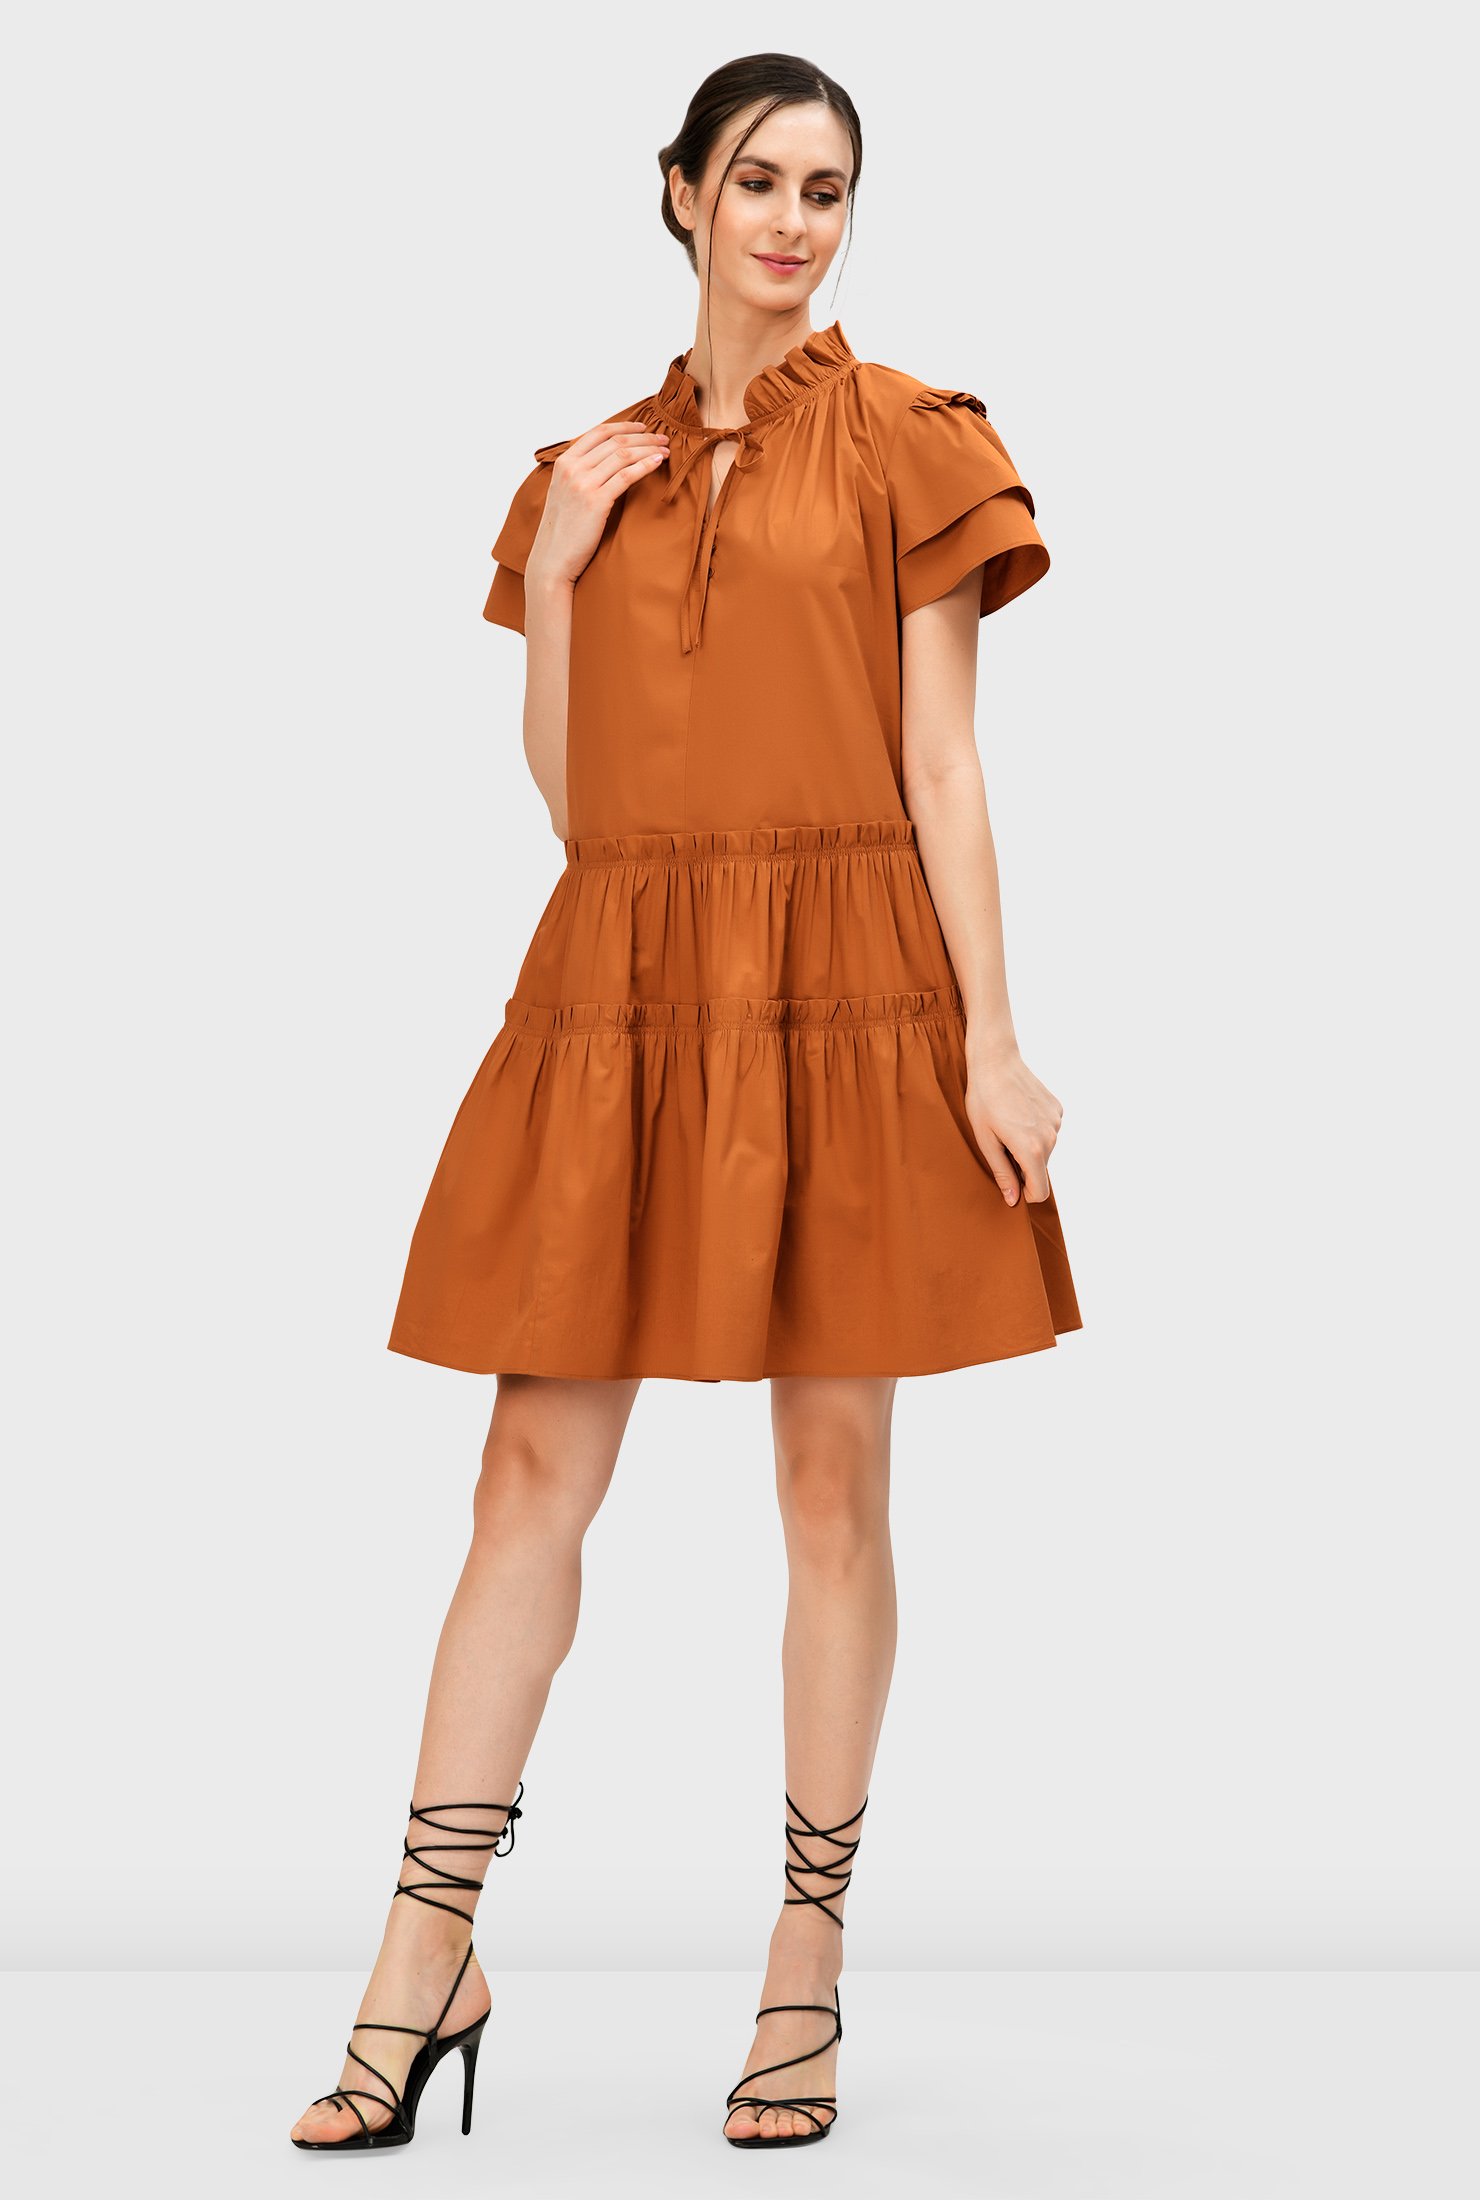 Our crisp cotton poplin dress offers pretty ruffle frills and a tiered skirt for a look that's well-matched to summery fun.